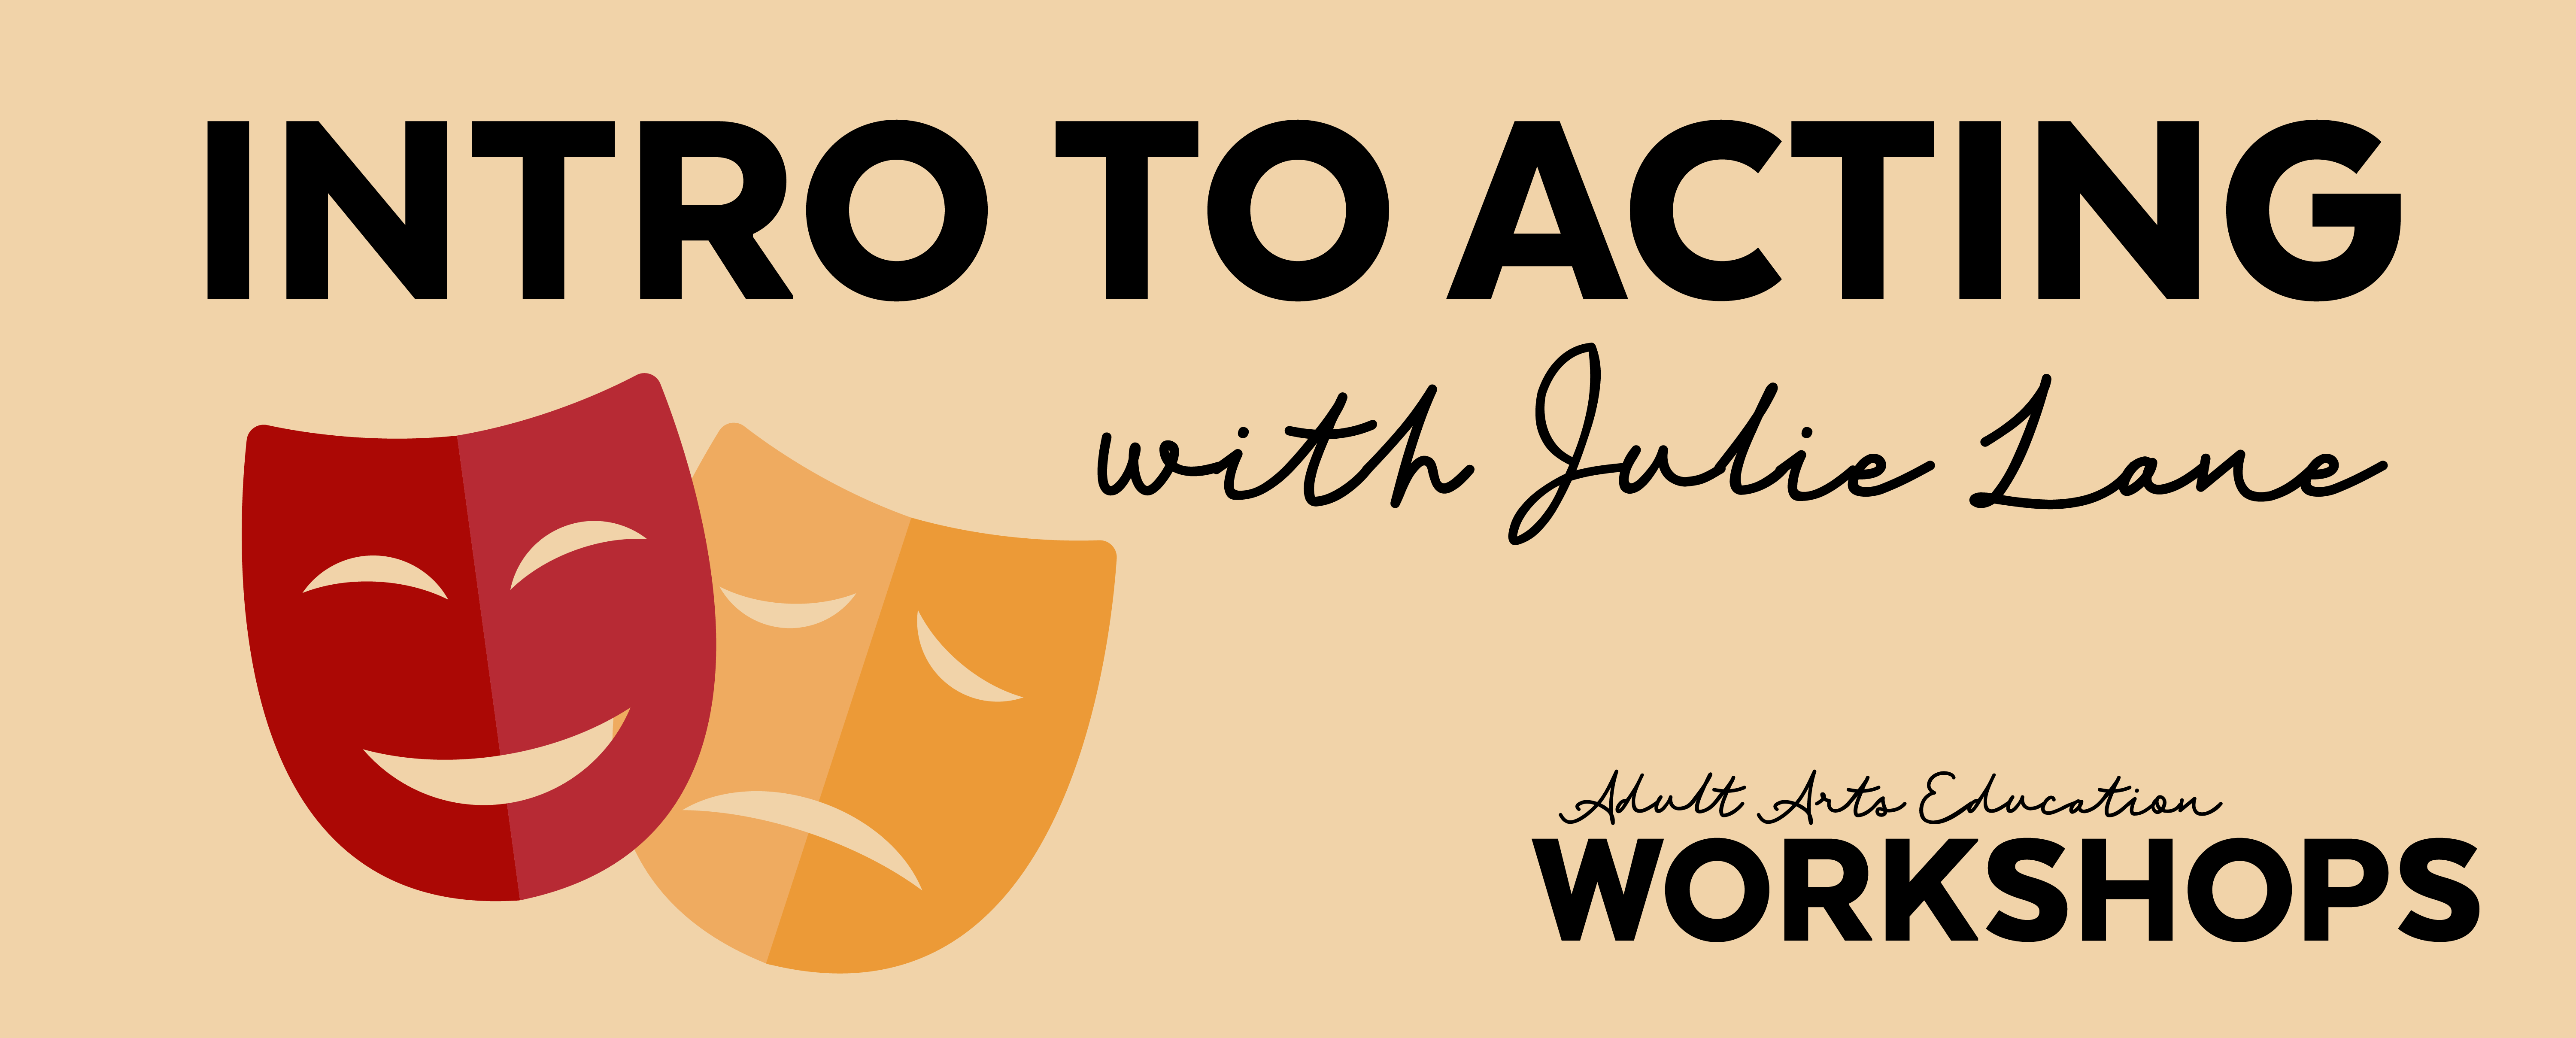 Intro to Acting with Julie Lane